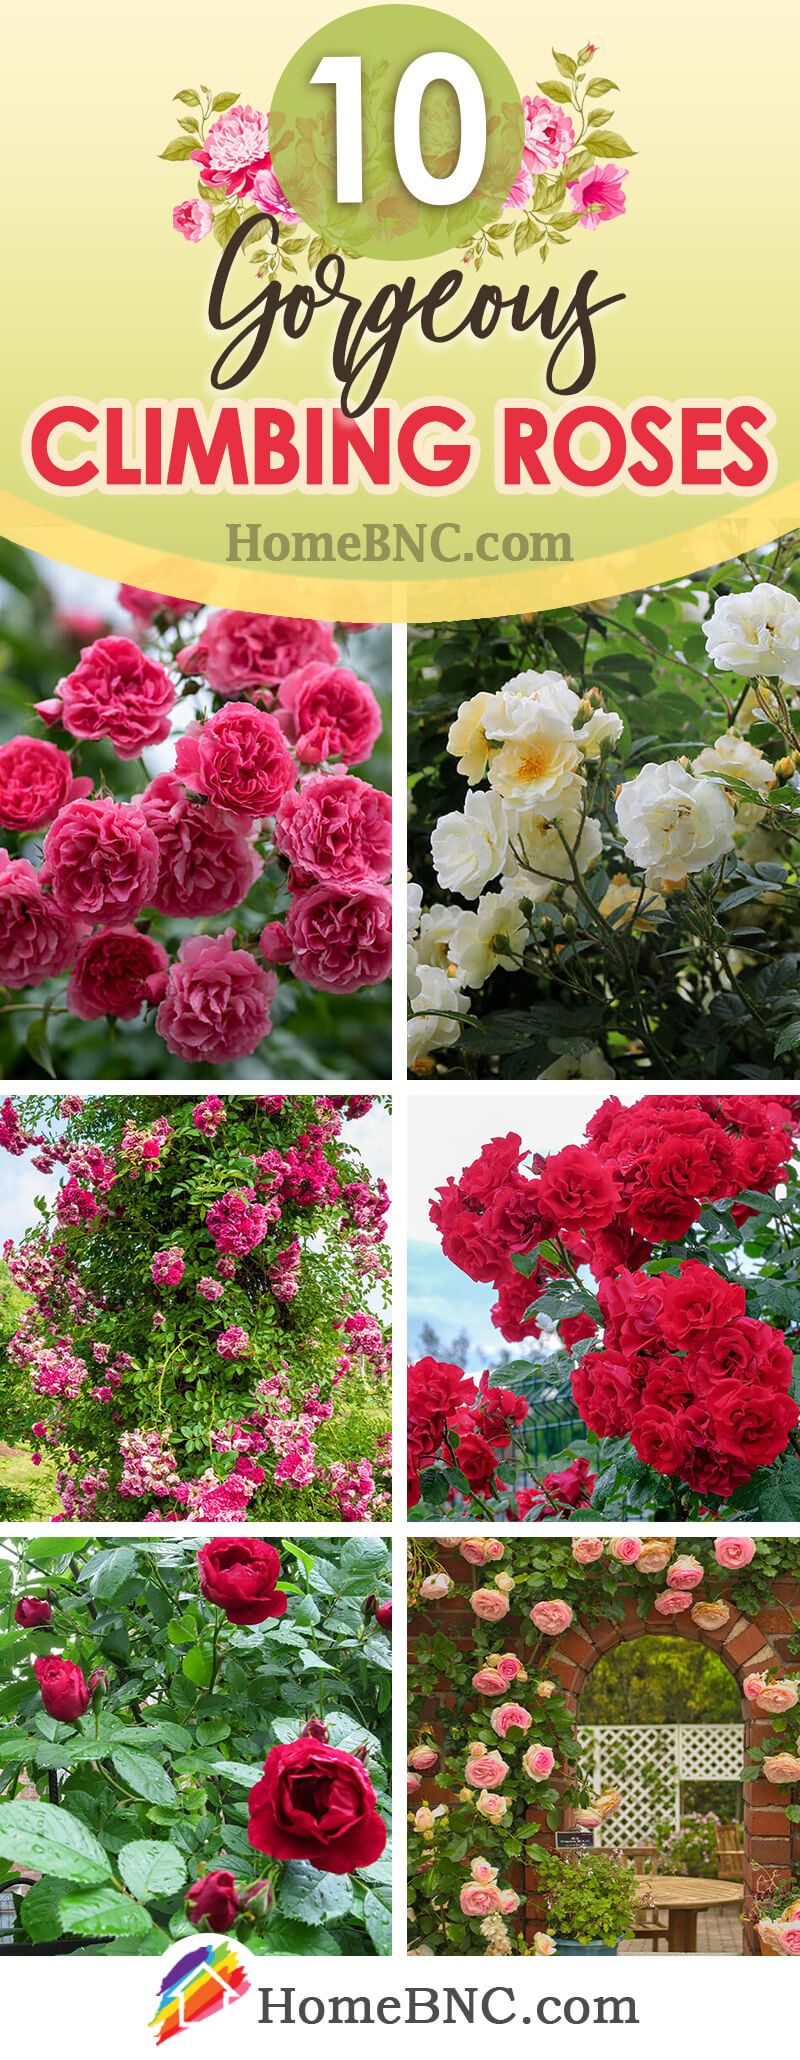 Types of Climbing Roses